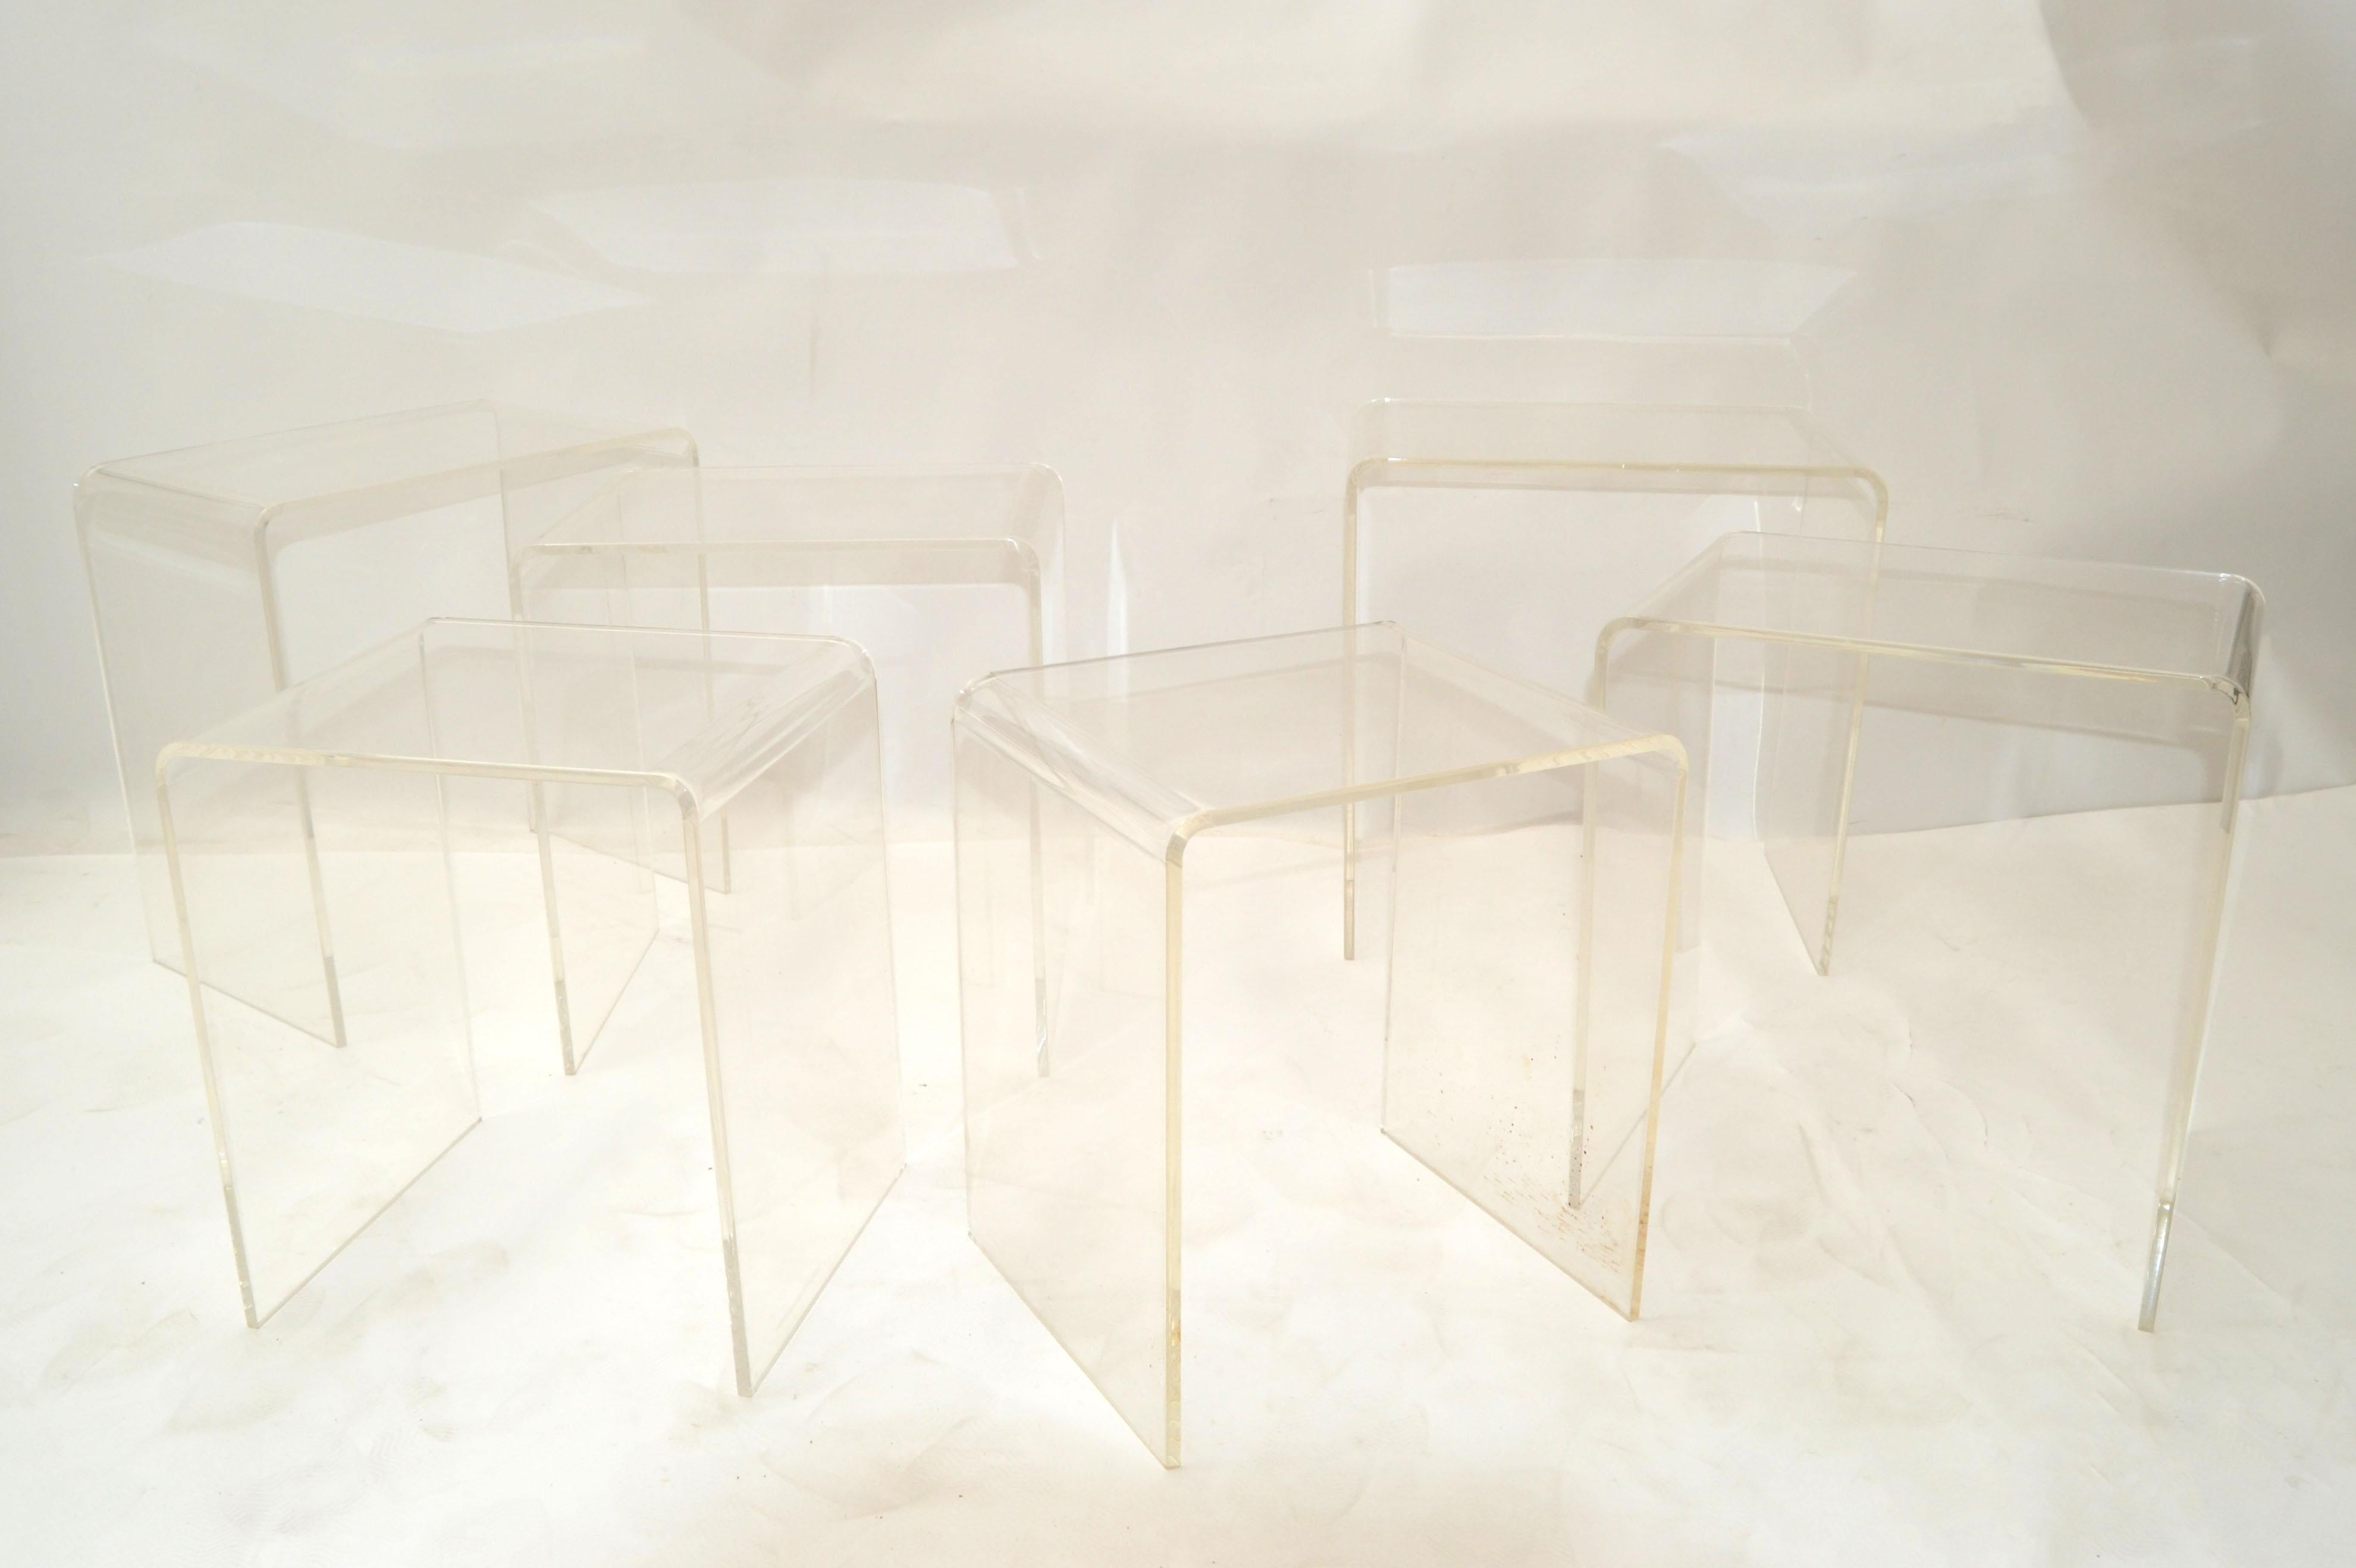 Hand-Crafted Pair of Lucite Waterfall Nesting Tables / Stacking Tables, Stools, Set of 3